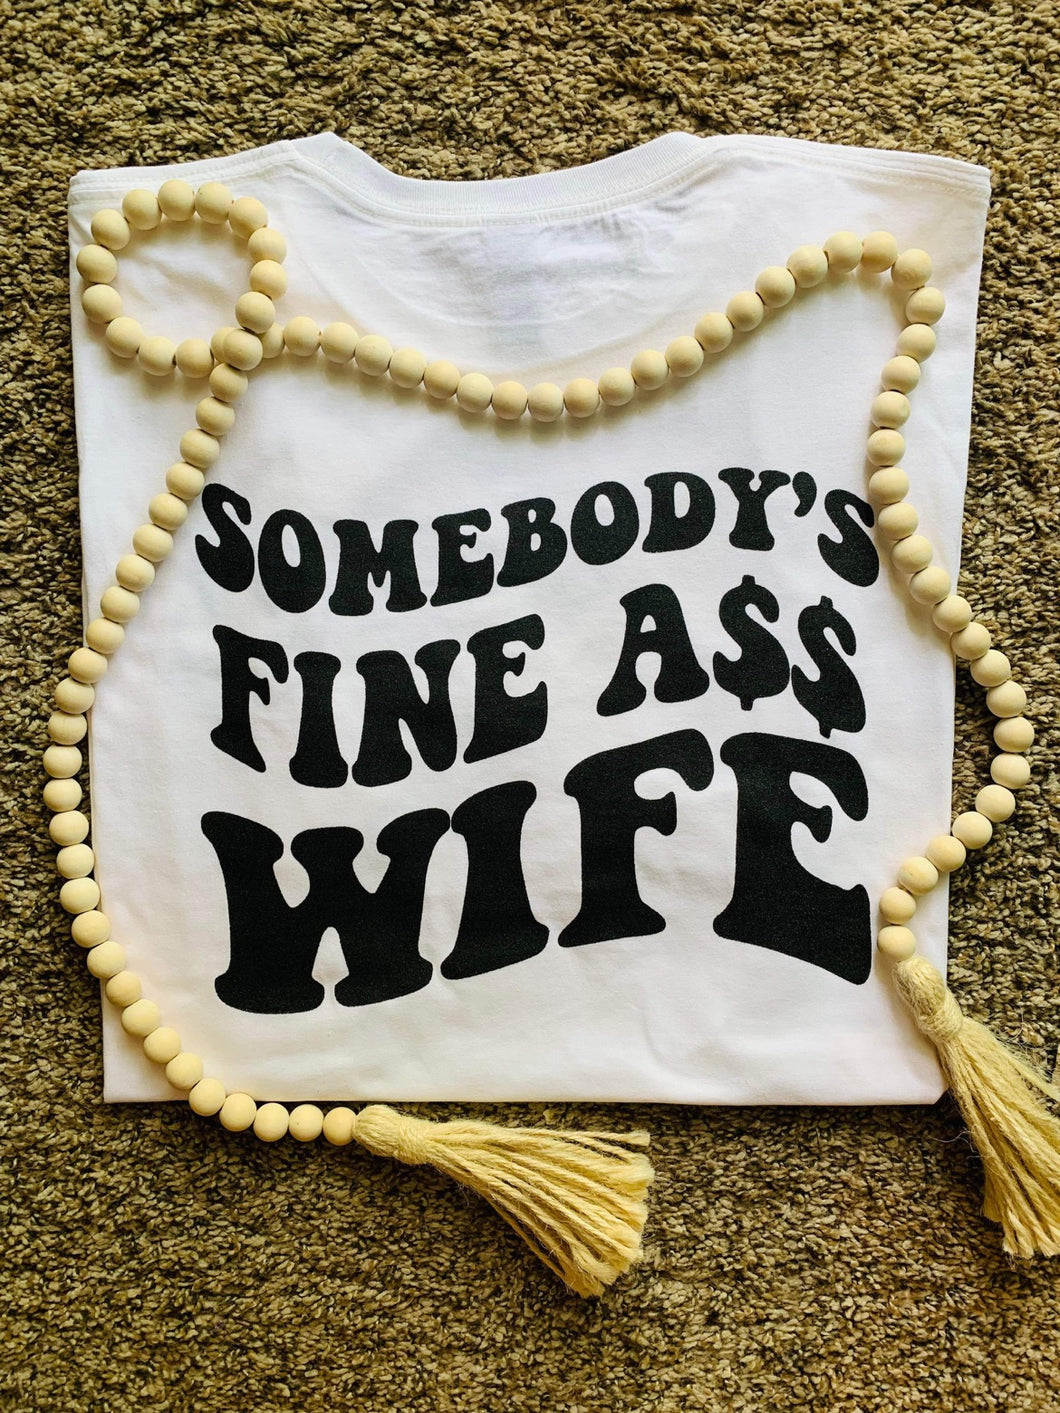 Somebody’s Fine A$$ Wife   SCREEN